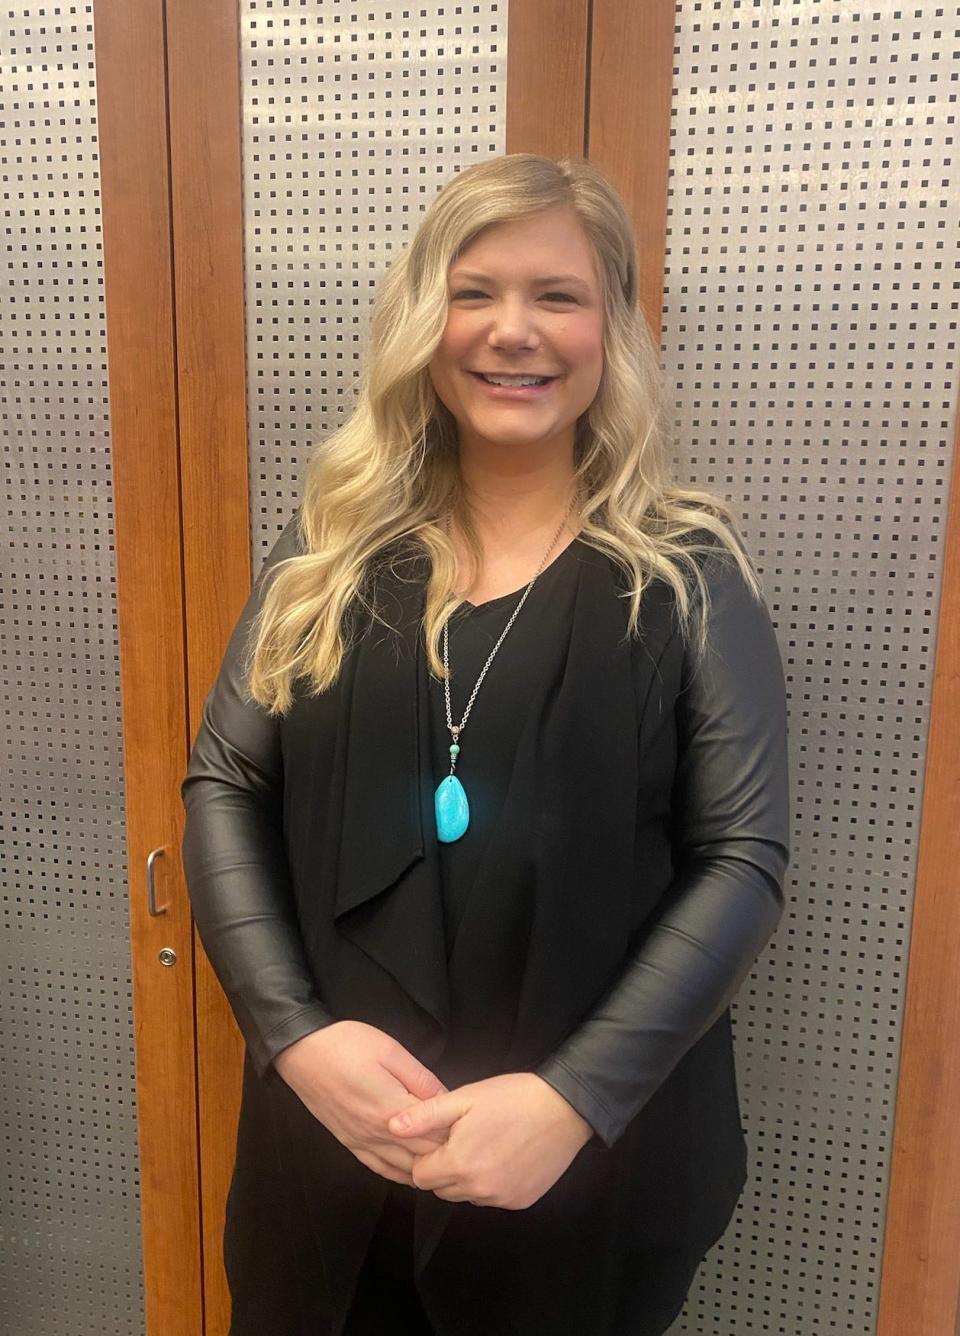 Kierstan Hinkle came to BNI this winter to represent Blair Rowland and the Bridge Group/Coldwell Banker Realty at a meeting. BNI members can send a sub from their business or from a list of area contacts willing to be a sub at a meeting.